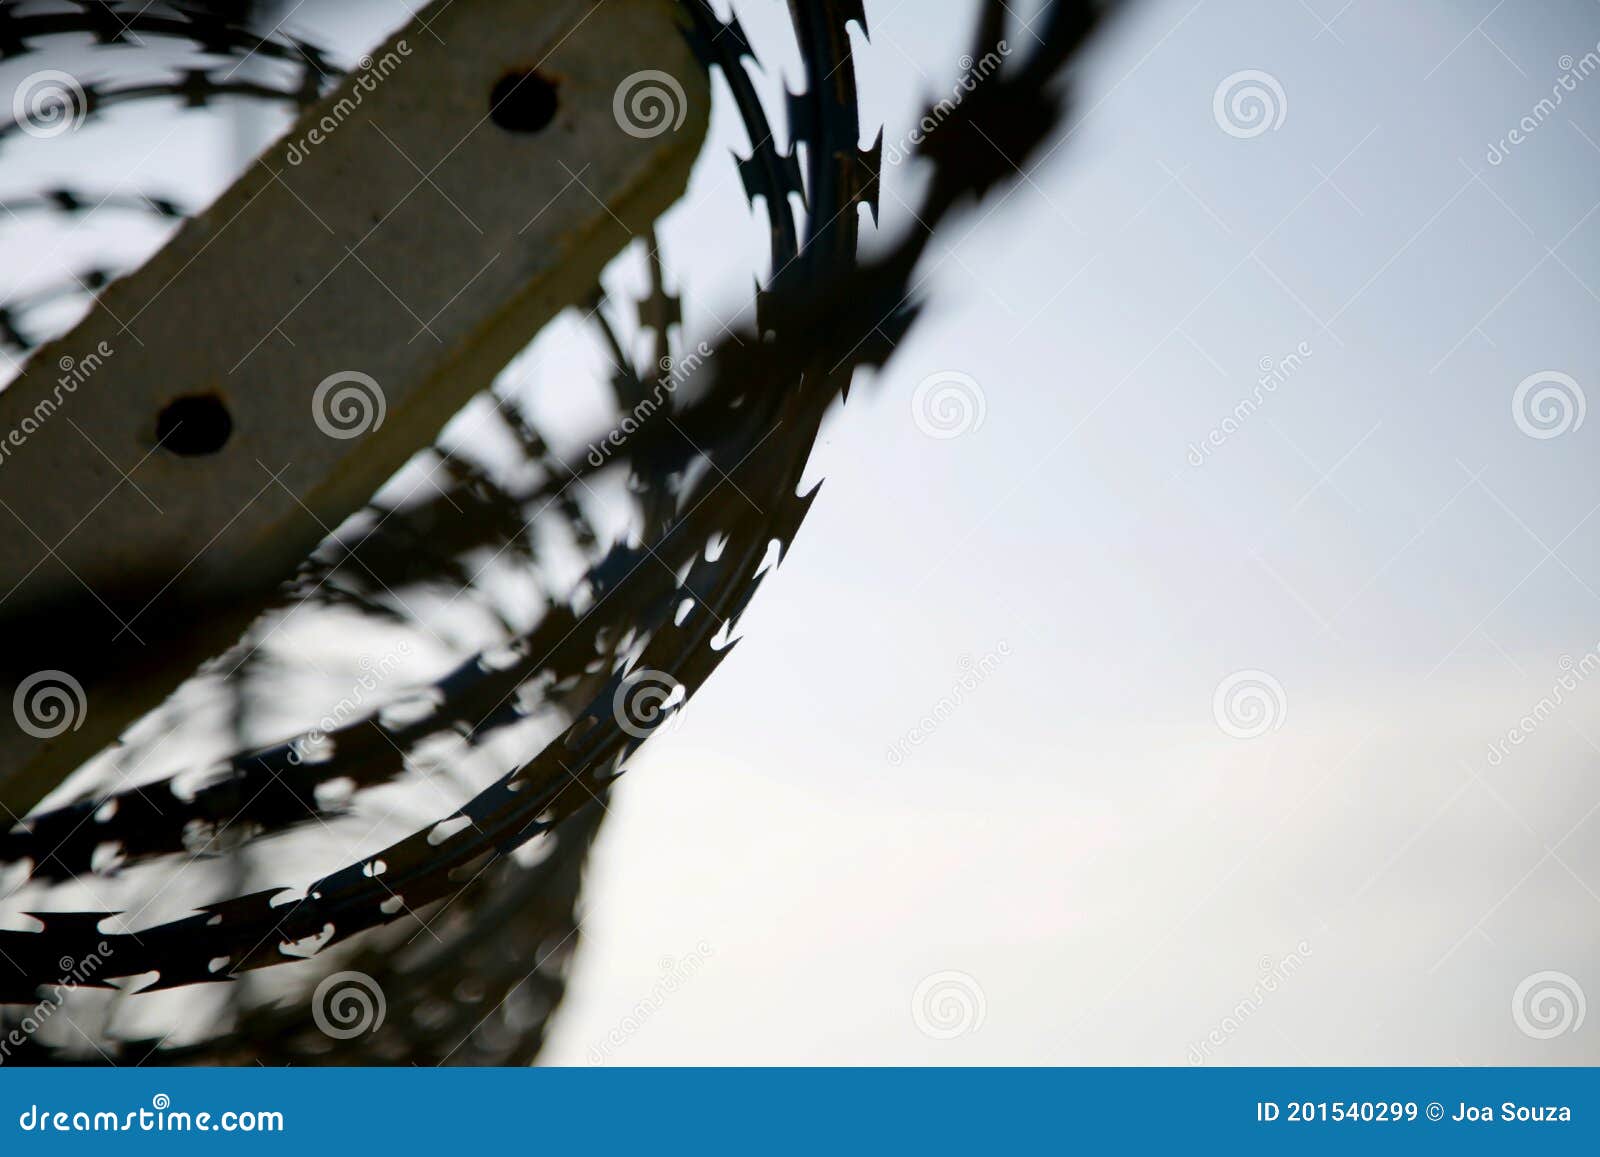 concertina wire fence in industrial area